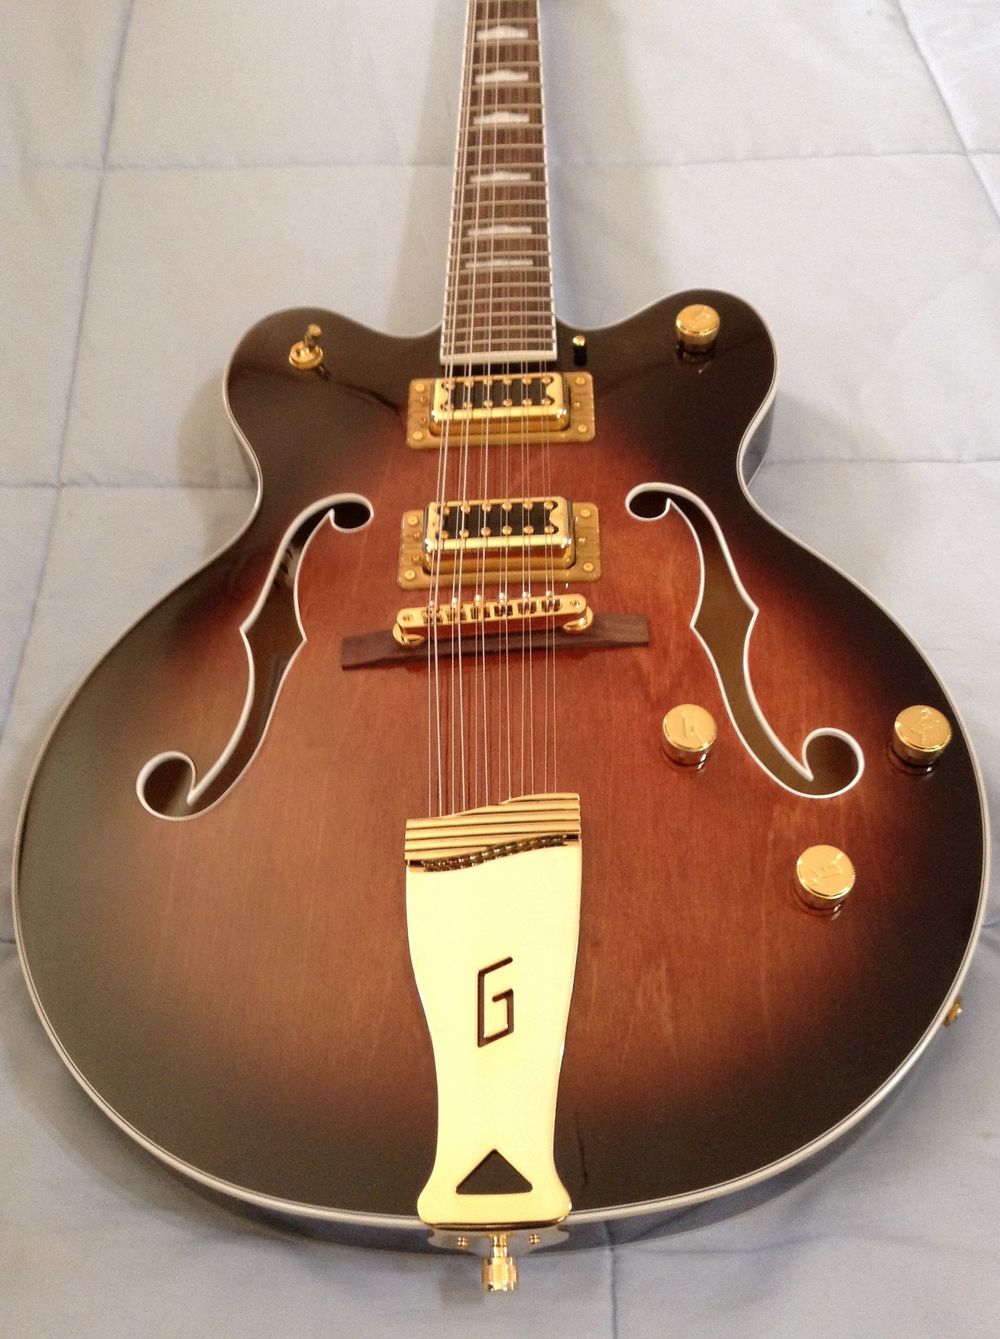 Gretsch G5422G 12-String Hollow Body Archtop Electric Guitar